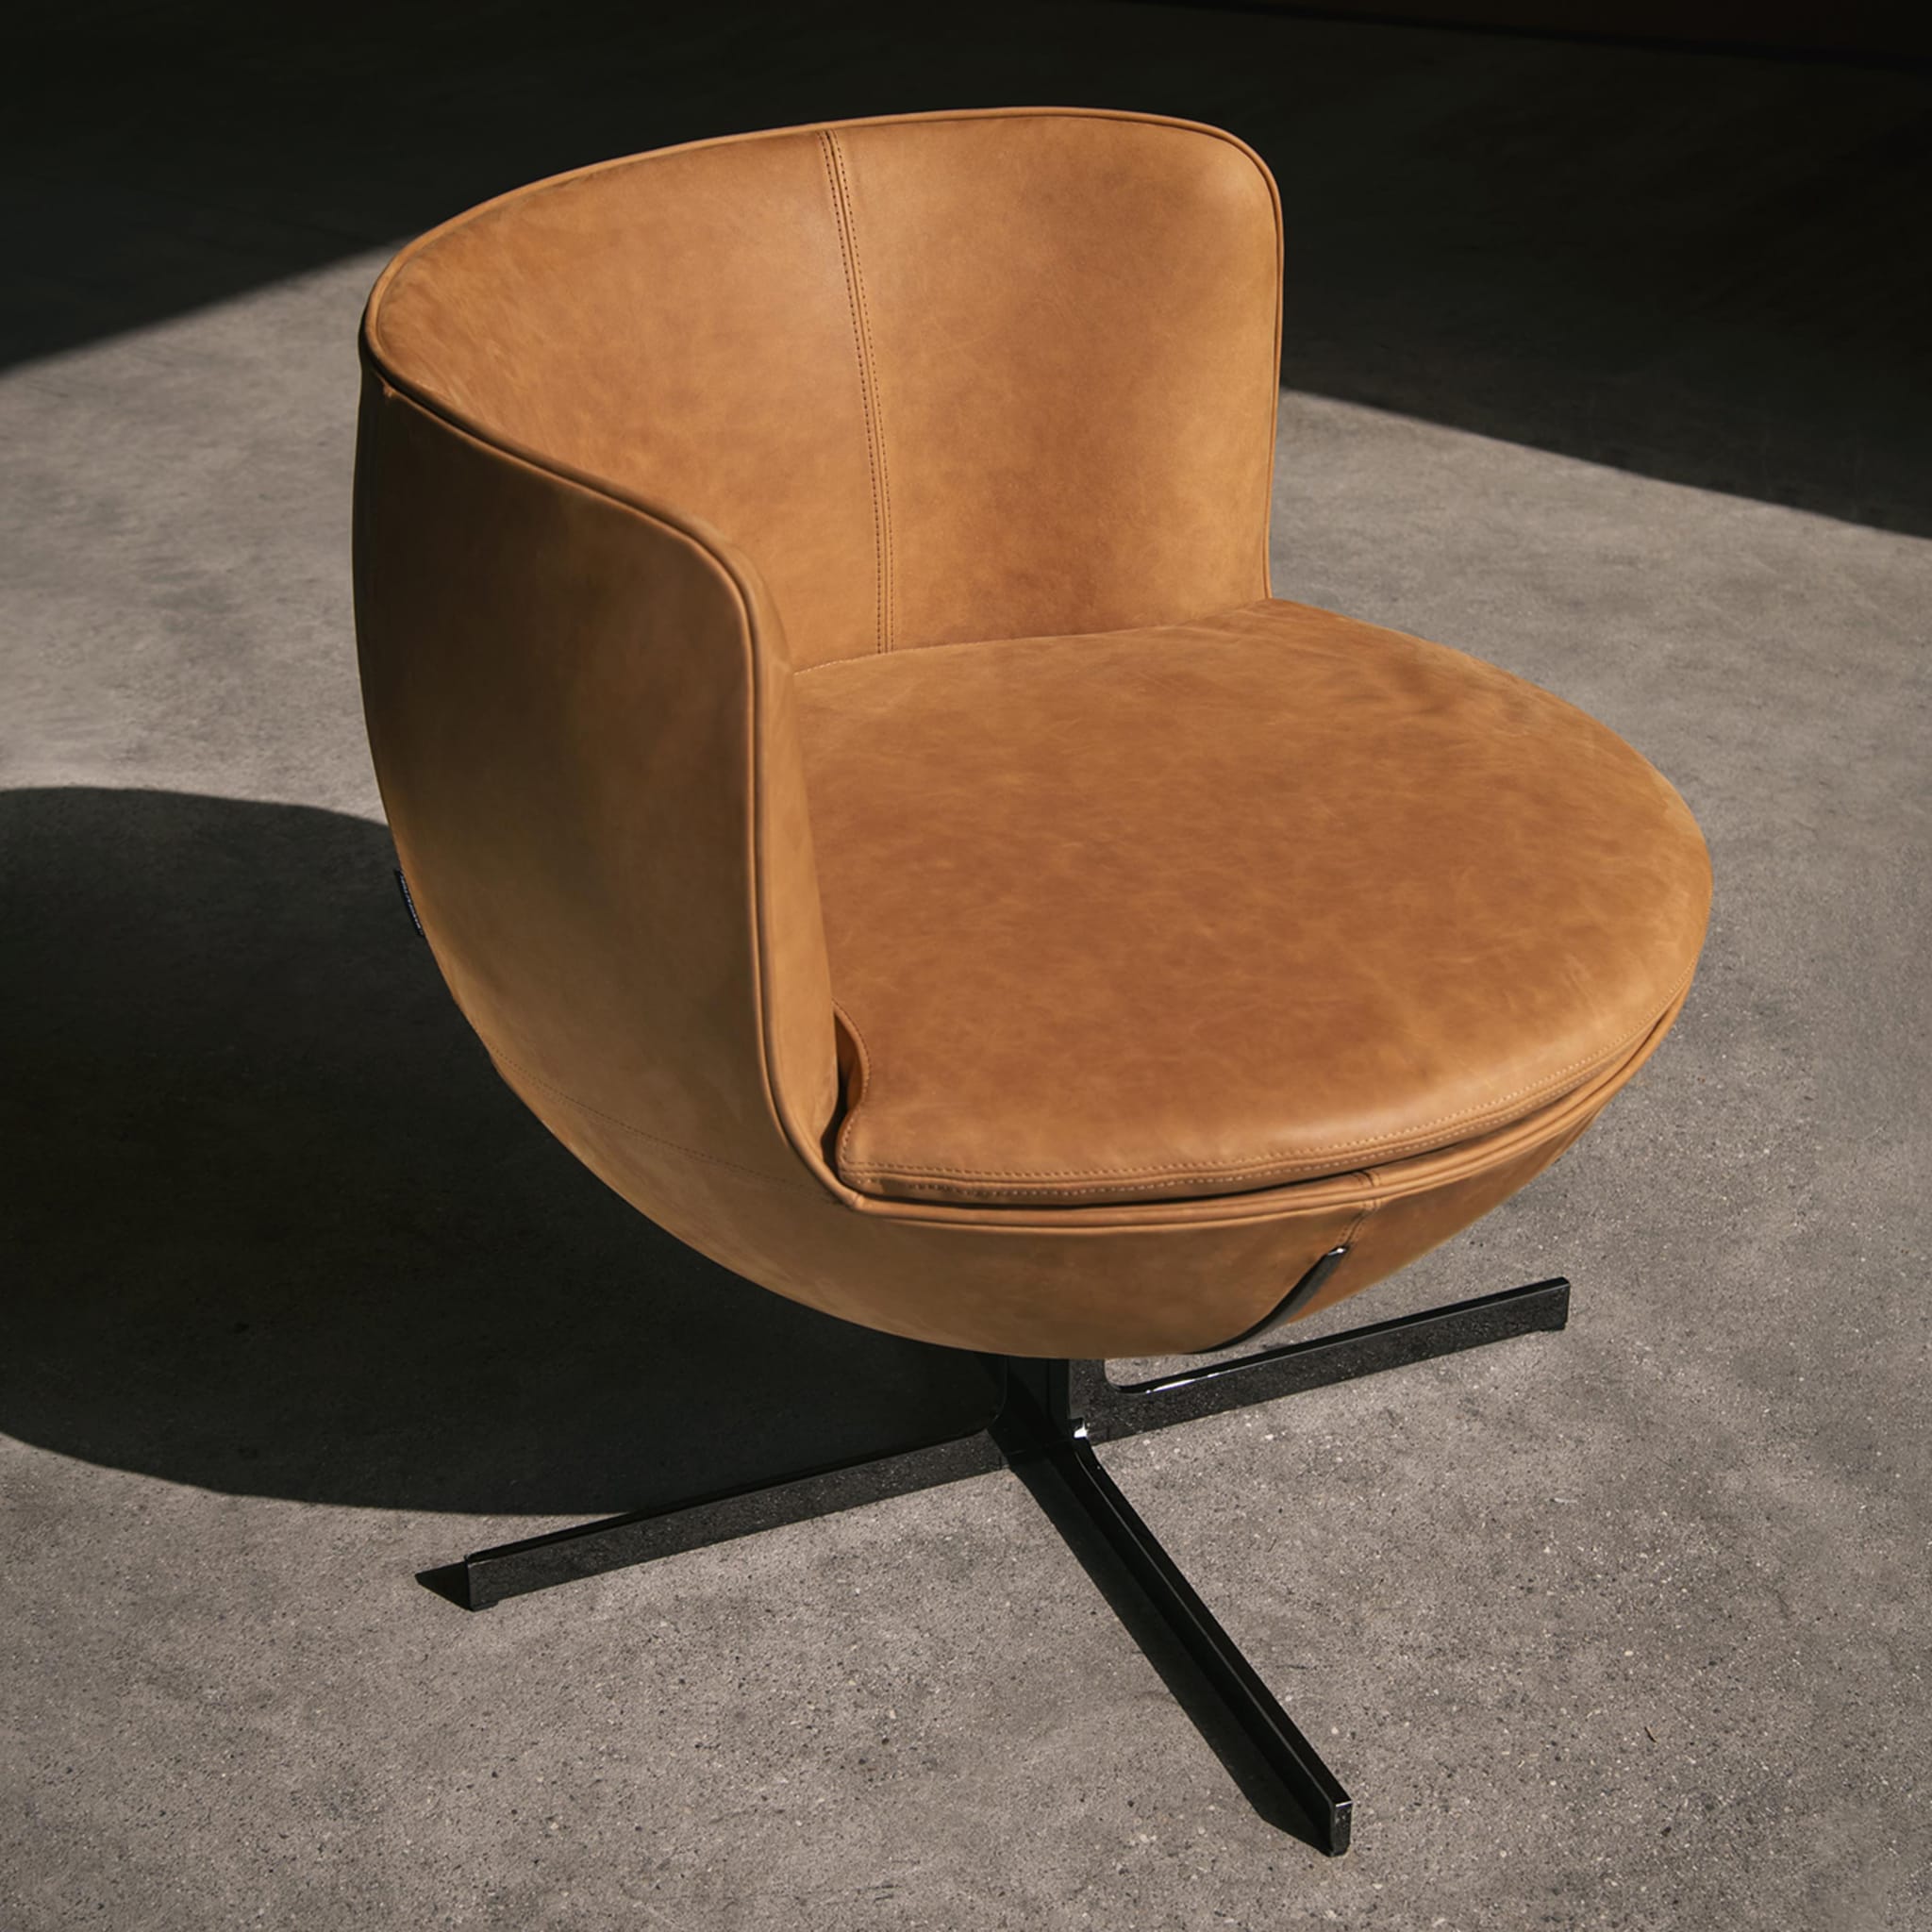 Calice Armchair by Patrick Norguet - Alternative view 3